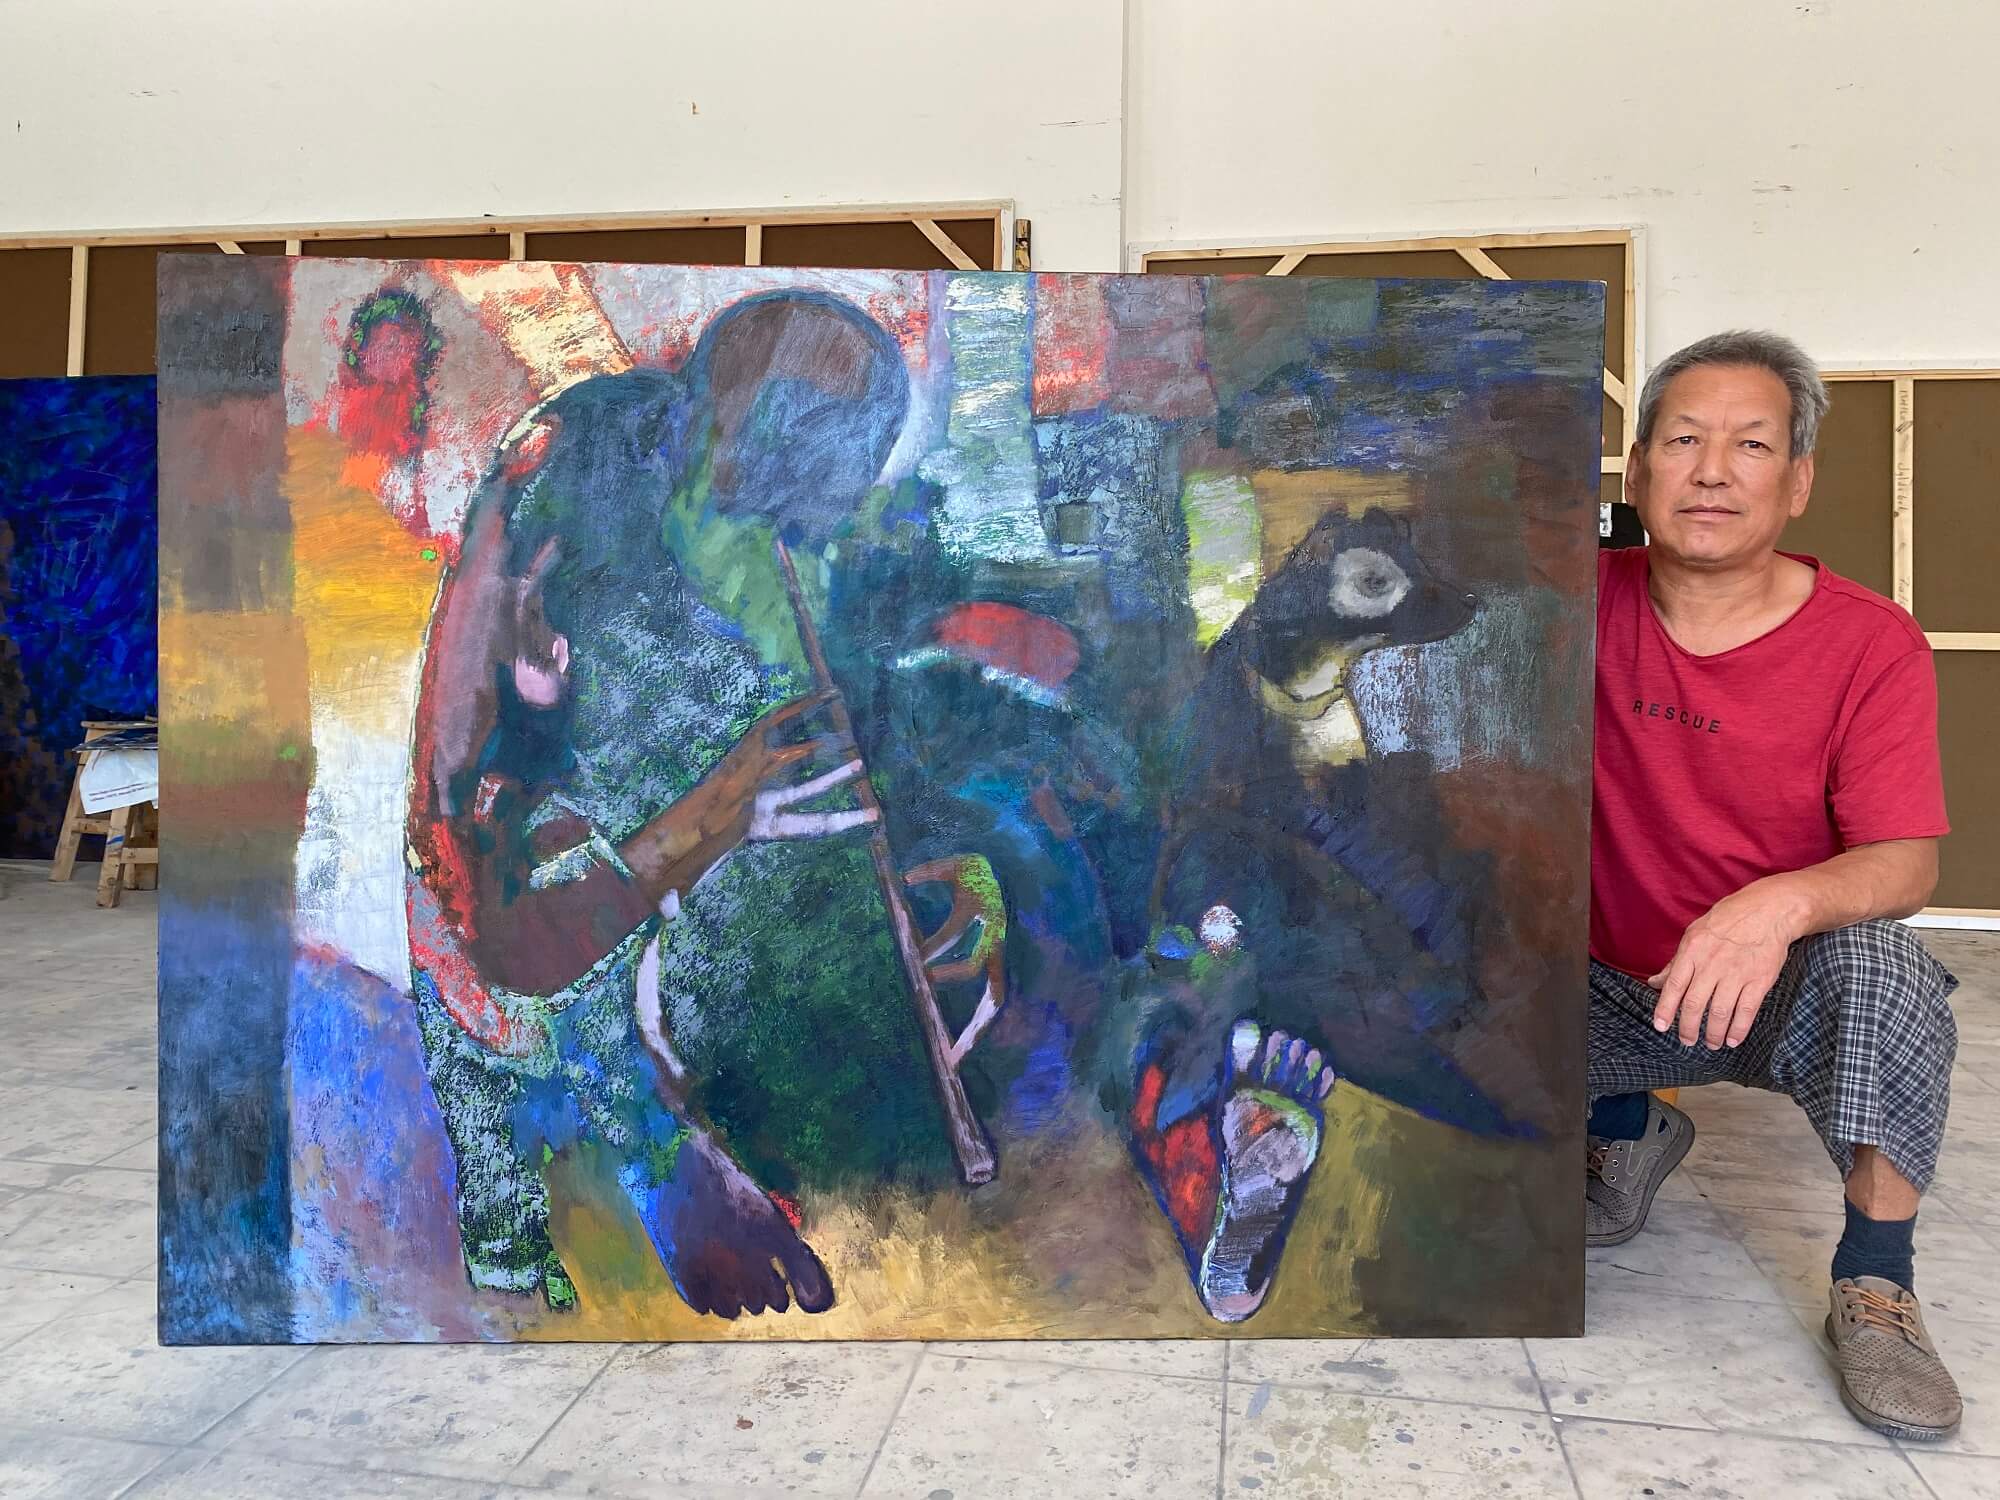 During the lockdown days imposed for controlling the COVID-19 pandemic, artist Zhyrgalbai  Maturaimov created canvas paintings that he titled as “Venetian Palace”, “Two Persons” and “Street Musician” for the Cyprus Museum of Modern Arts